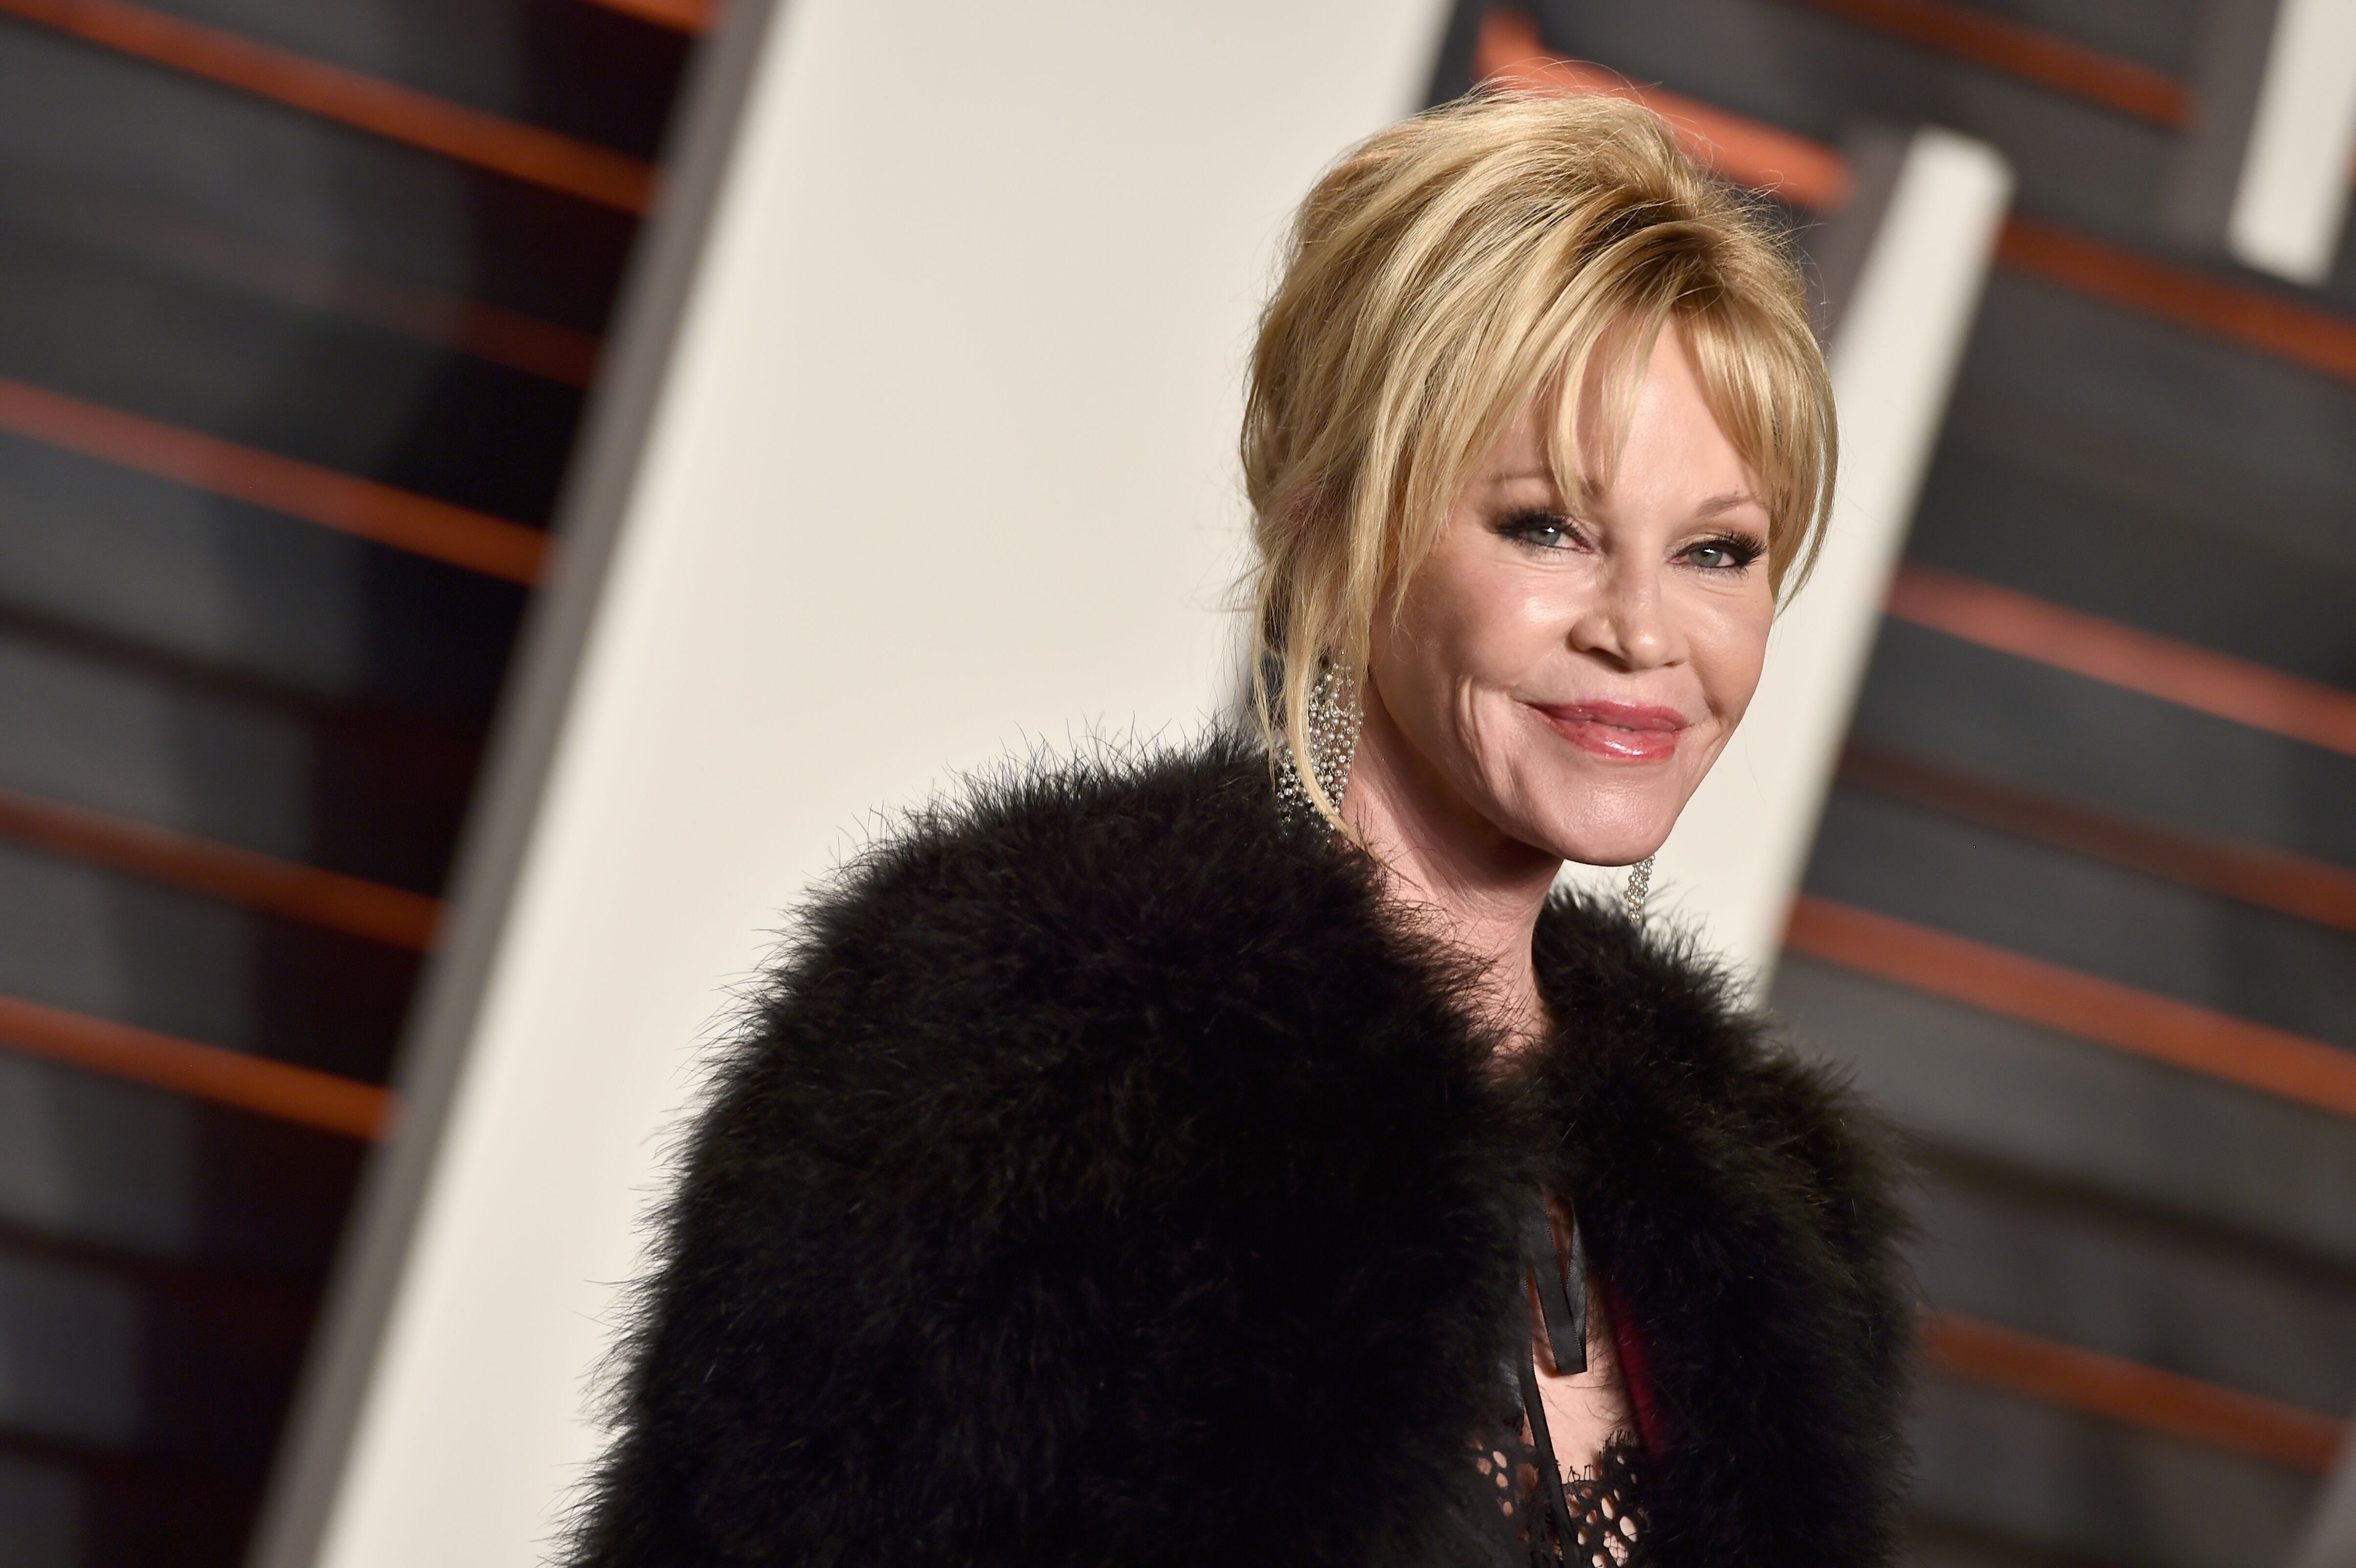 Melanie Griffith attends the 2016 Vanity Fair Oscar Party Hosted By Graydon Carter at the Wallis Annenberg Center for the Performing Arts in Beverly Hills, California | Photo: Getty Images